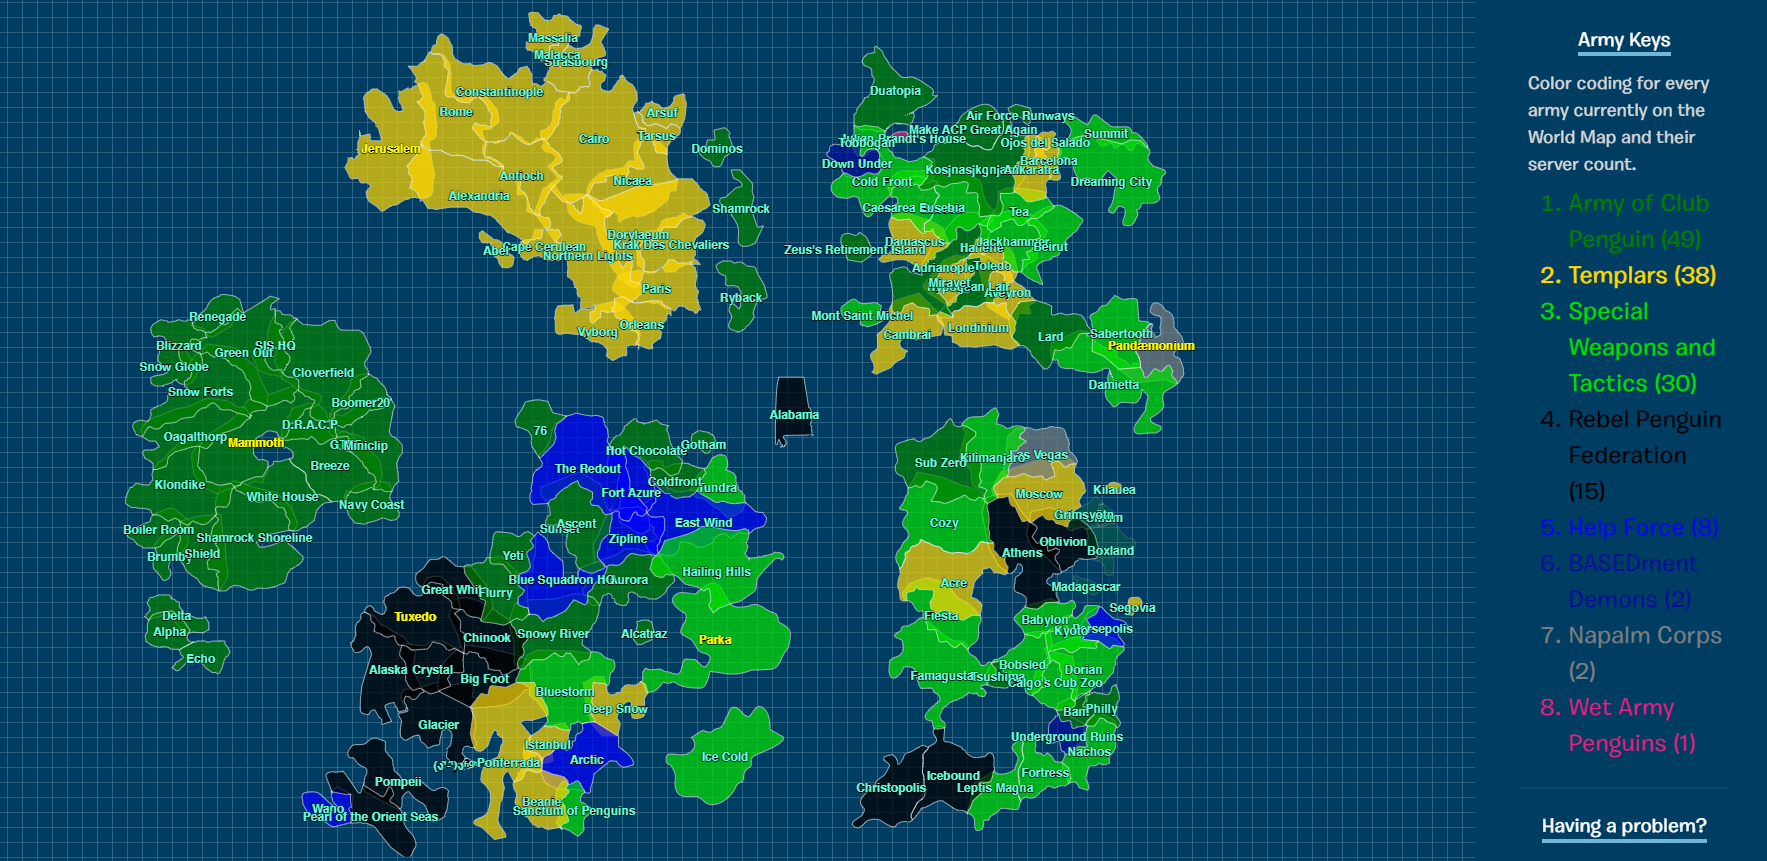 CPA Server Map